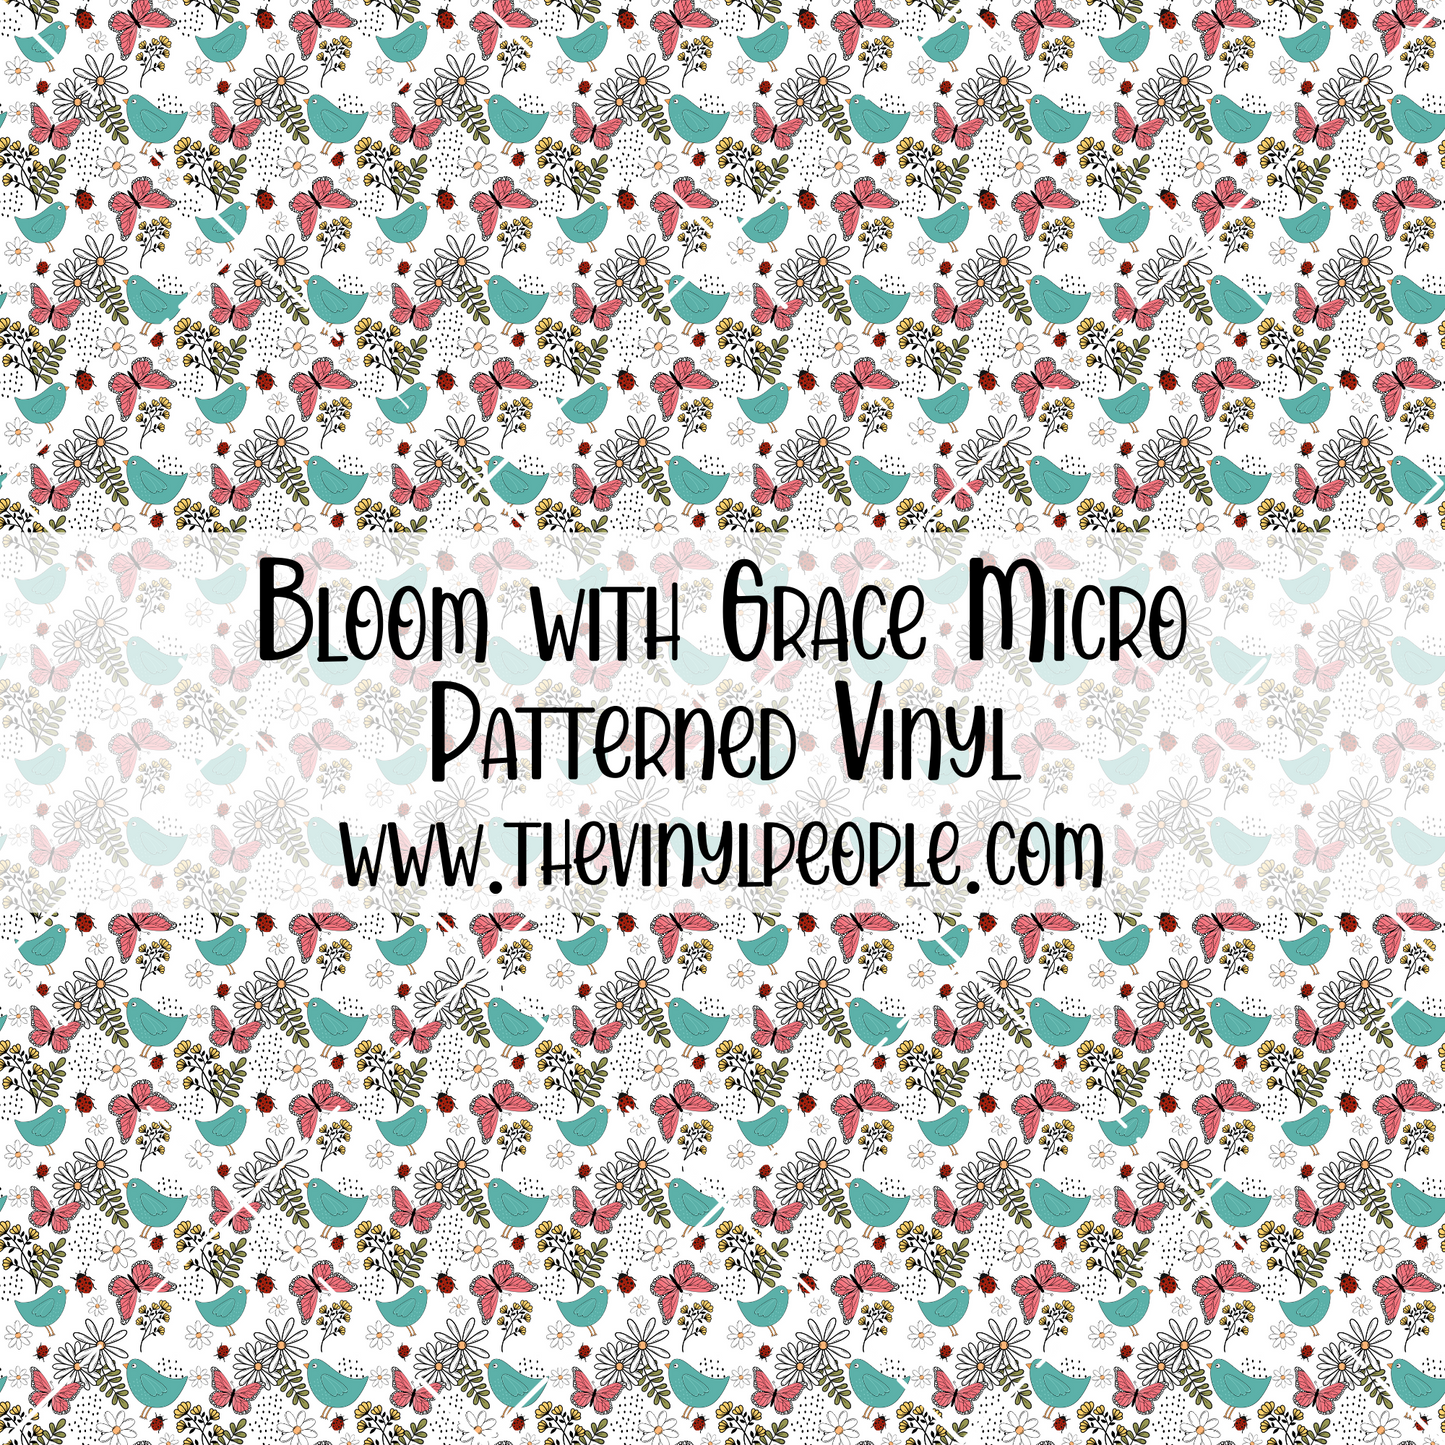 Bloom with Grace Patterned Vinyl